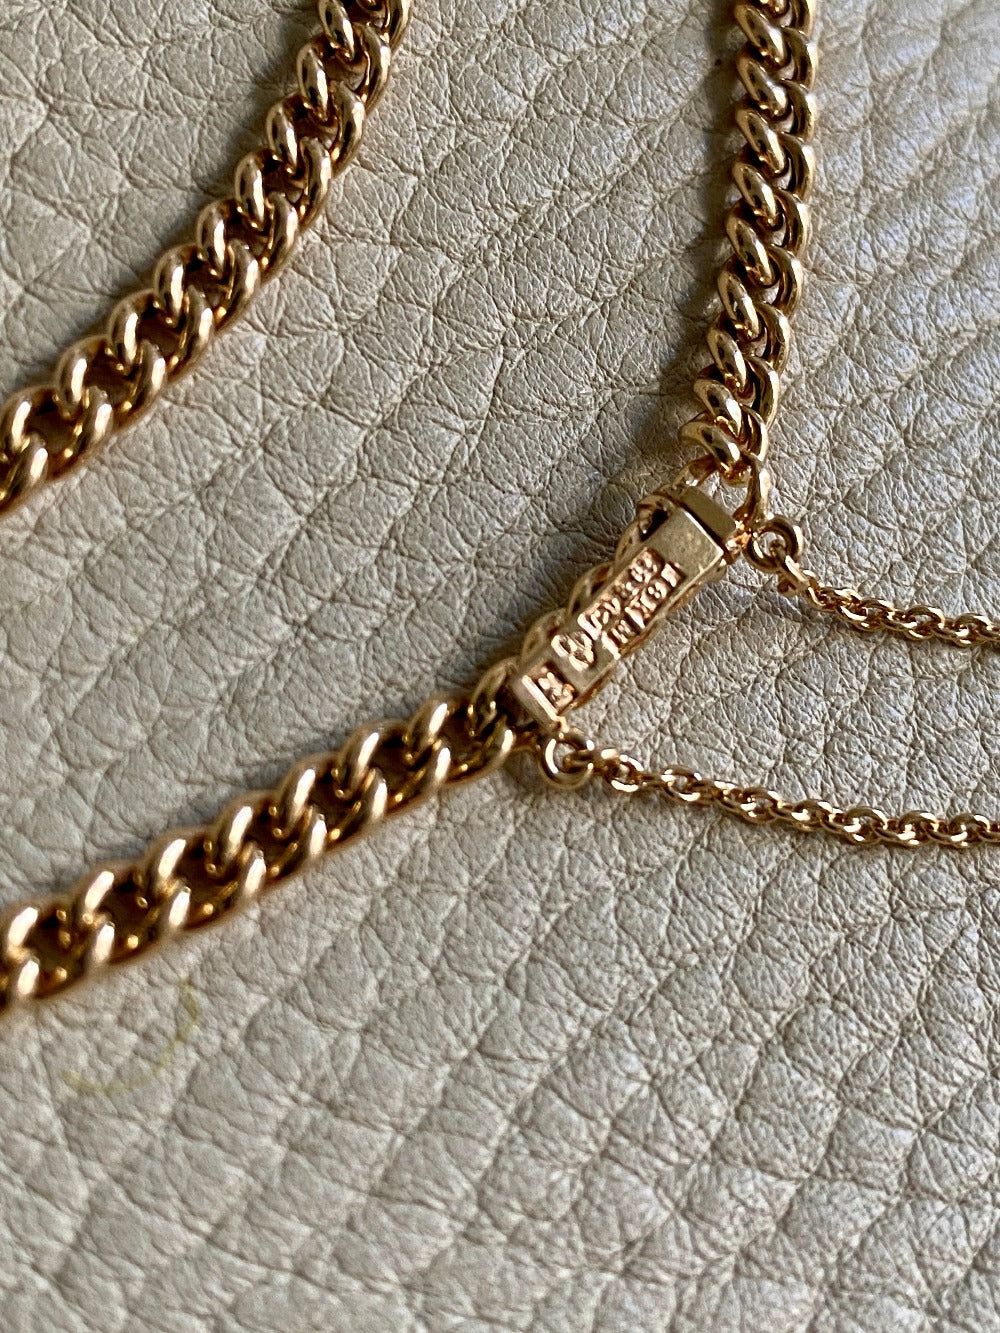 1917 Curb link bracelet in 18k yellow gold - 6.7 inch length